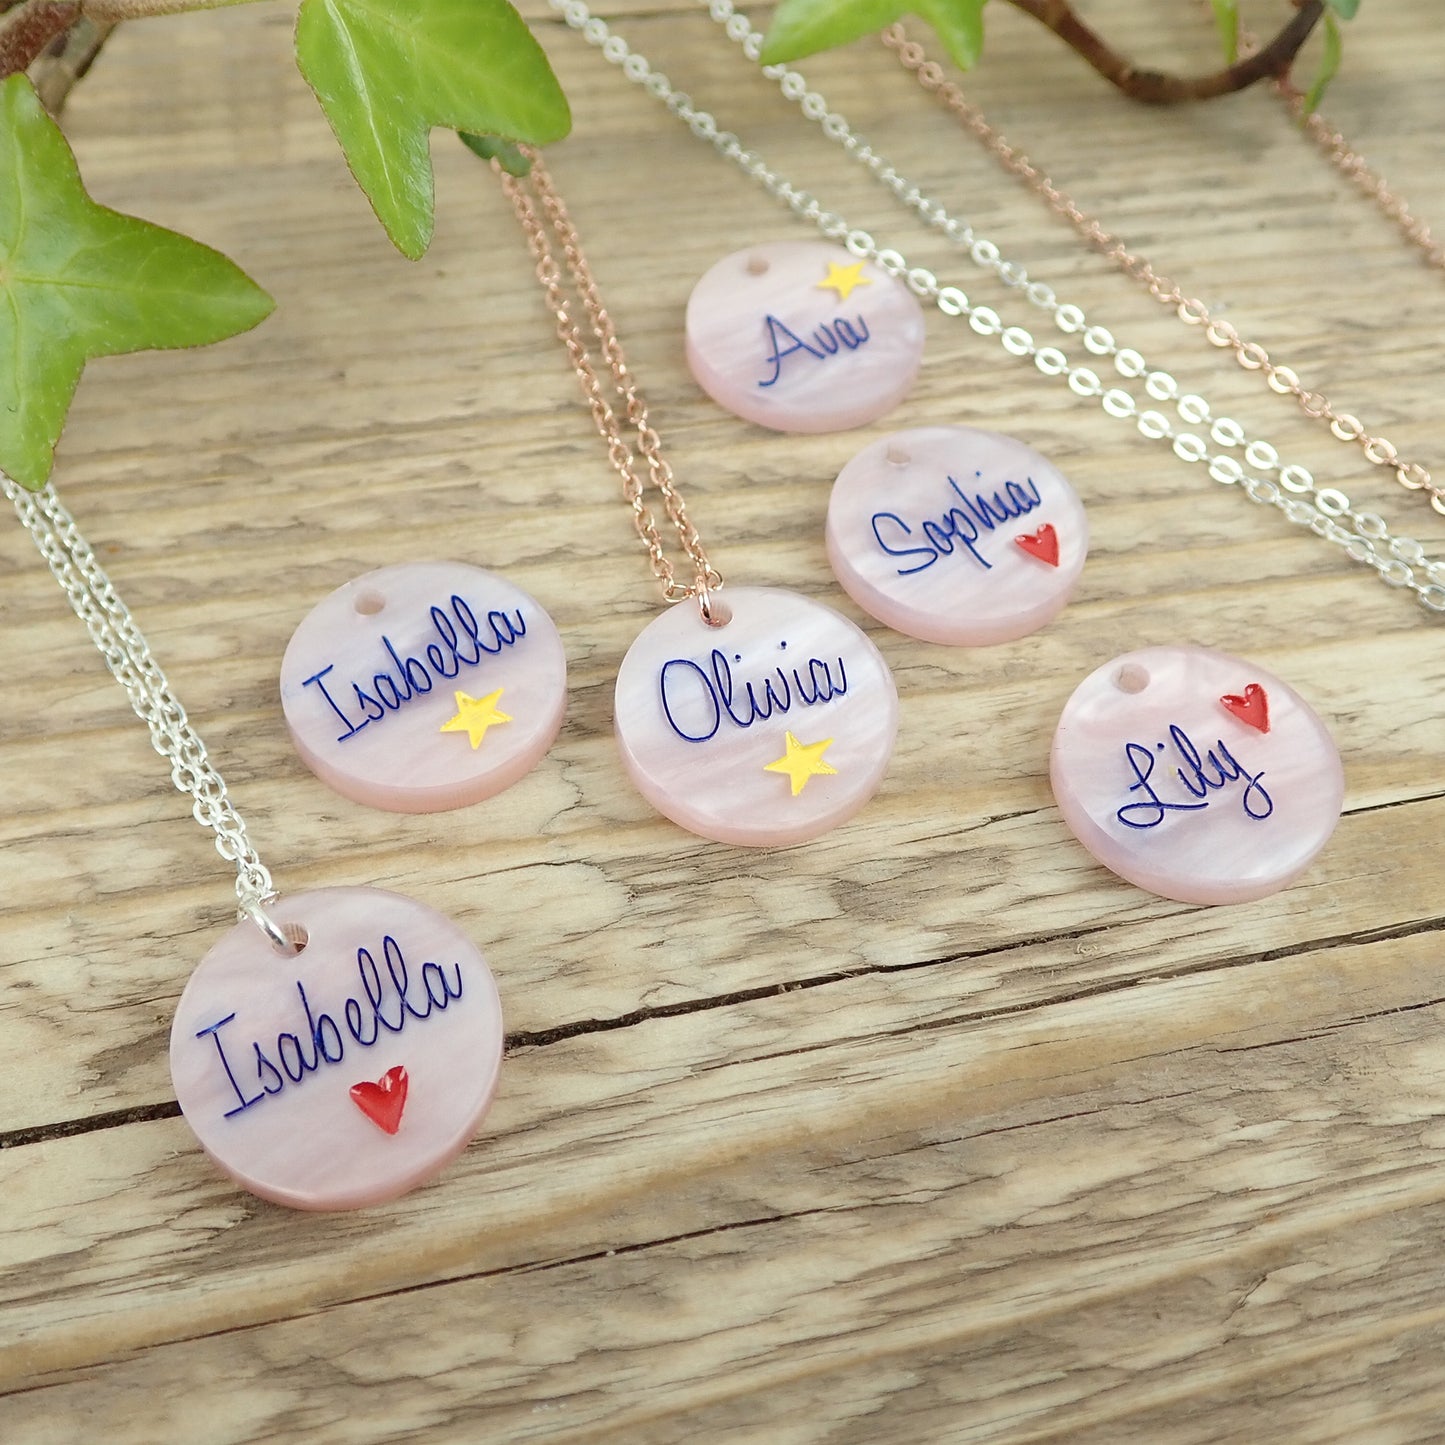 Personalised Pink Pearl Name Pendant Necklace